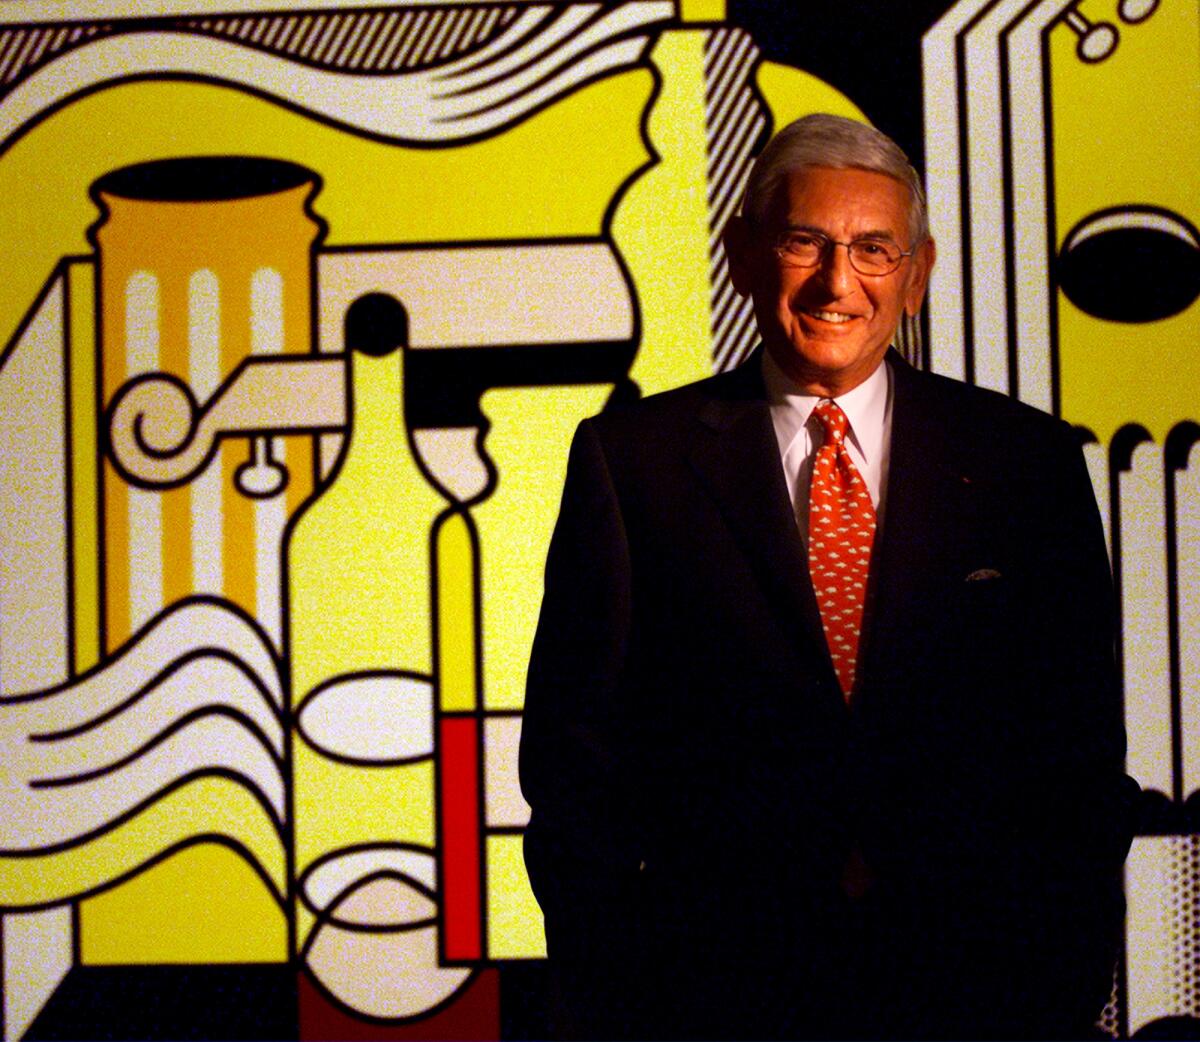 Eli Broad stands in front of the Roy Lichtenstein painting "Purist Still Life."